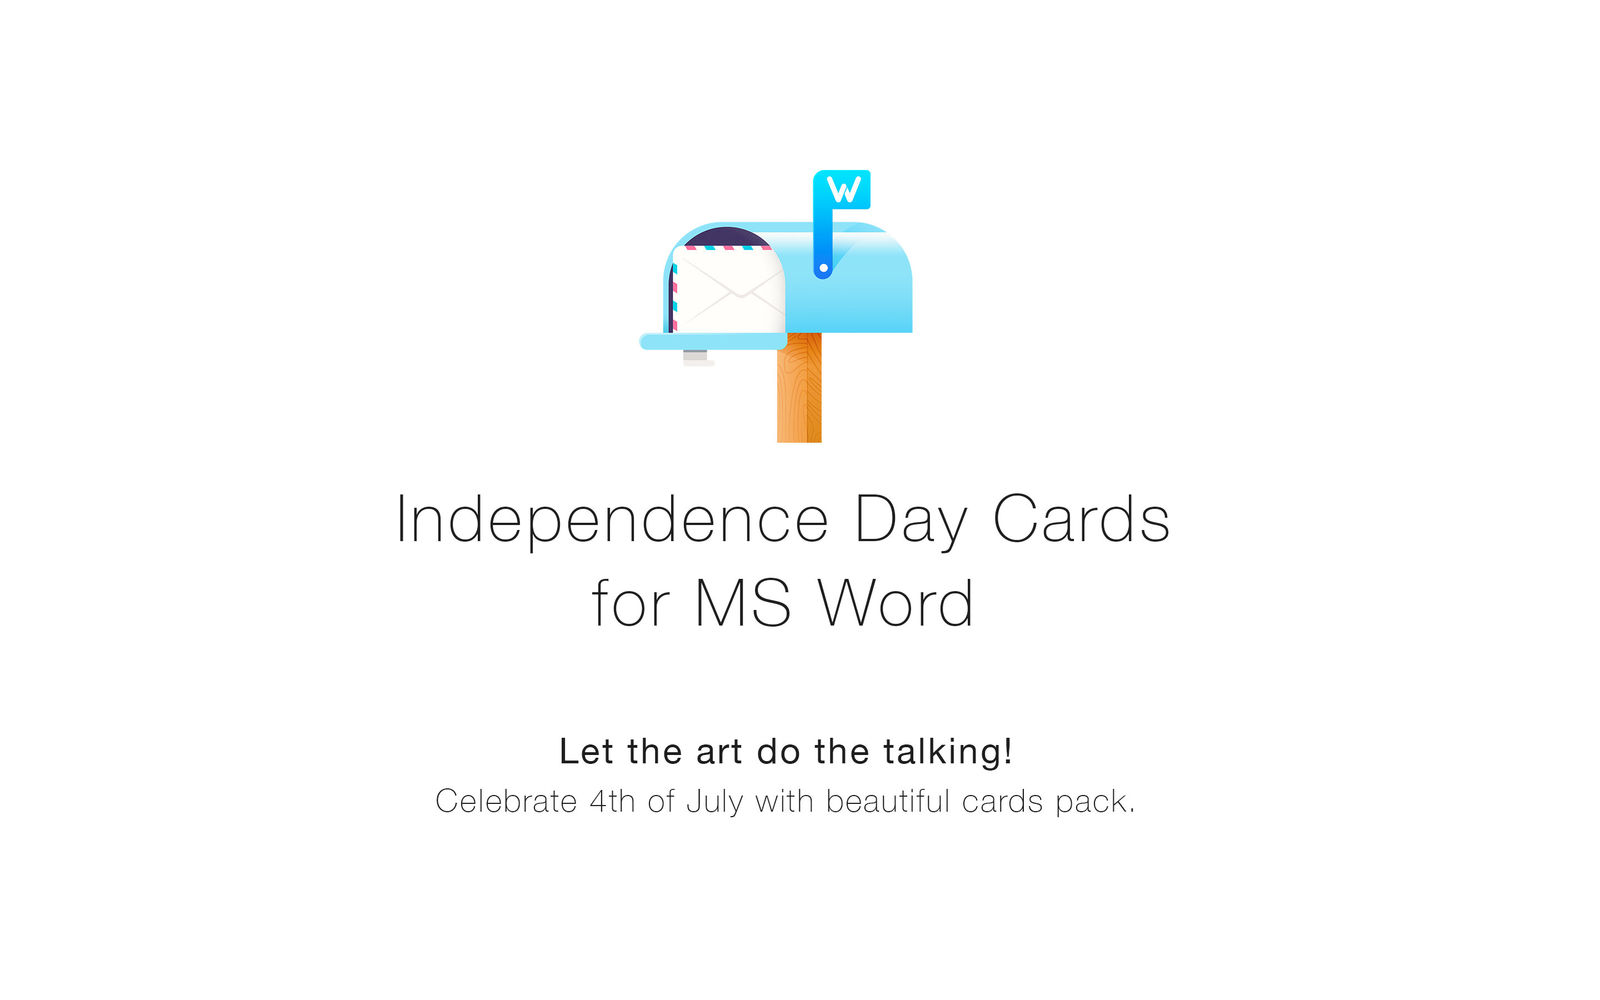 Independence Day cards for MS Word 1.0 : Main Window